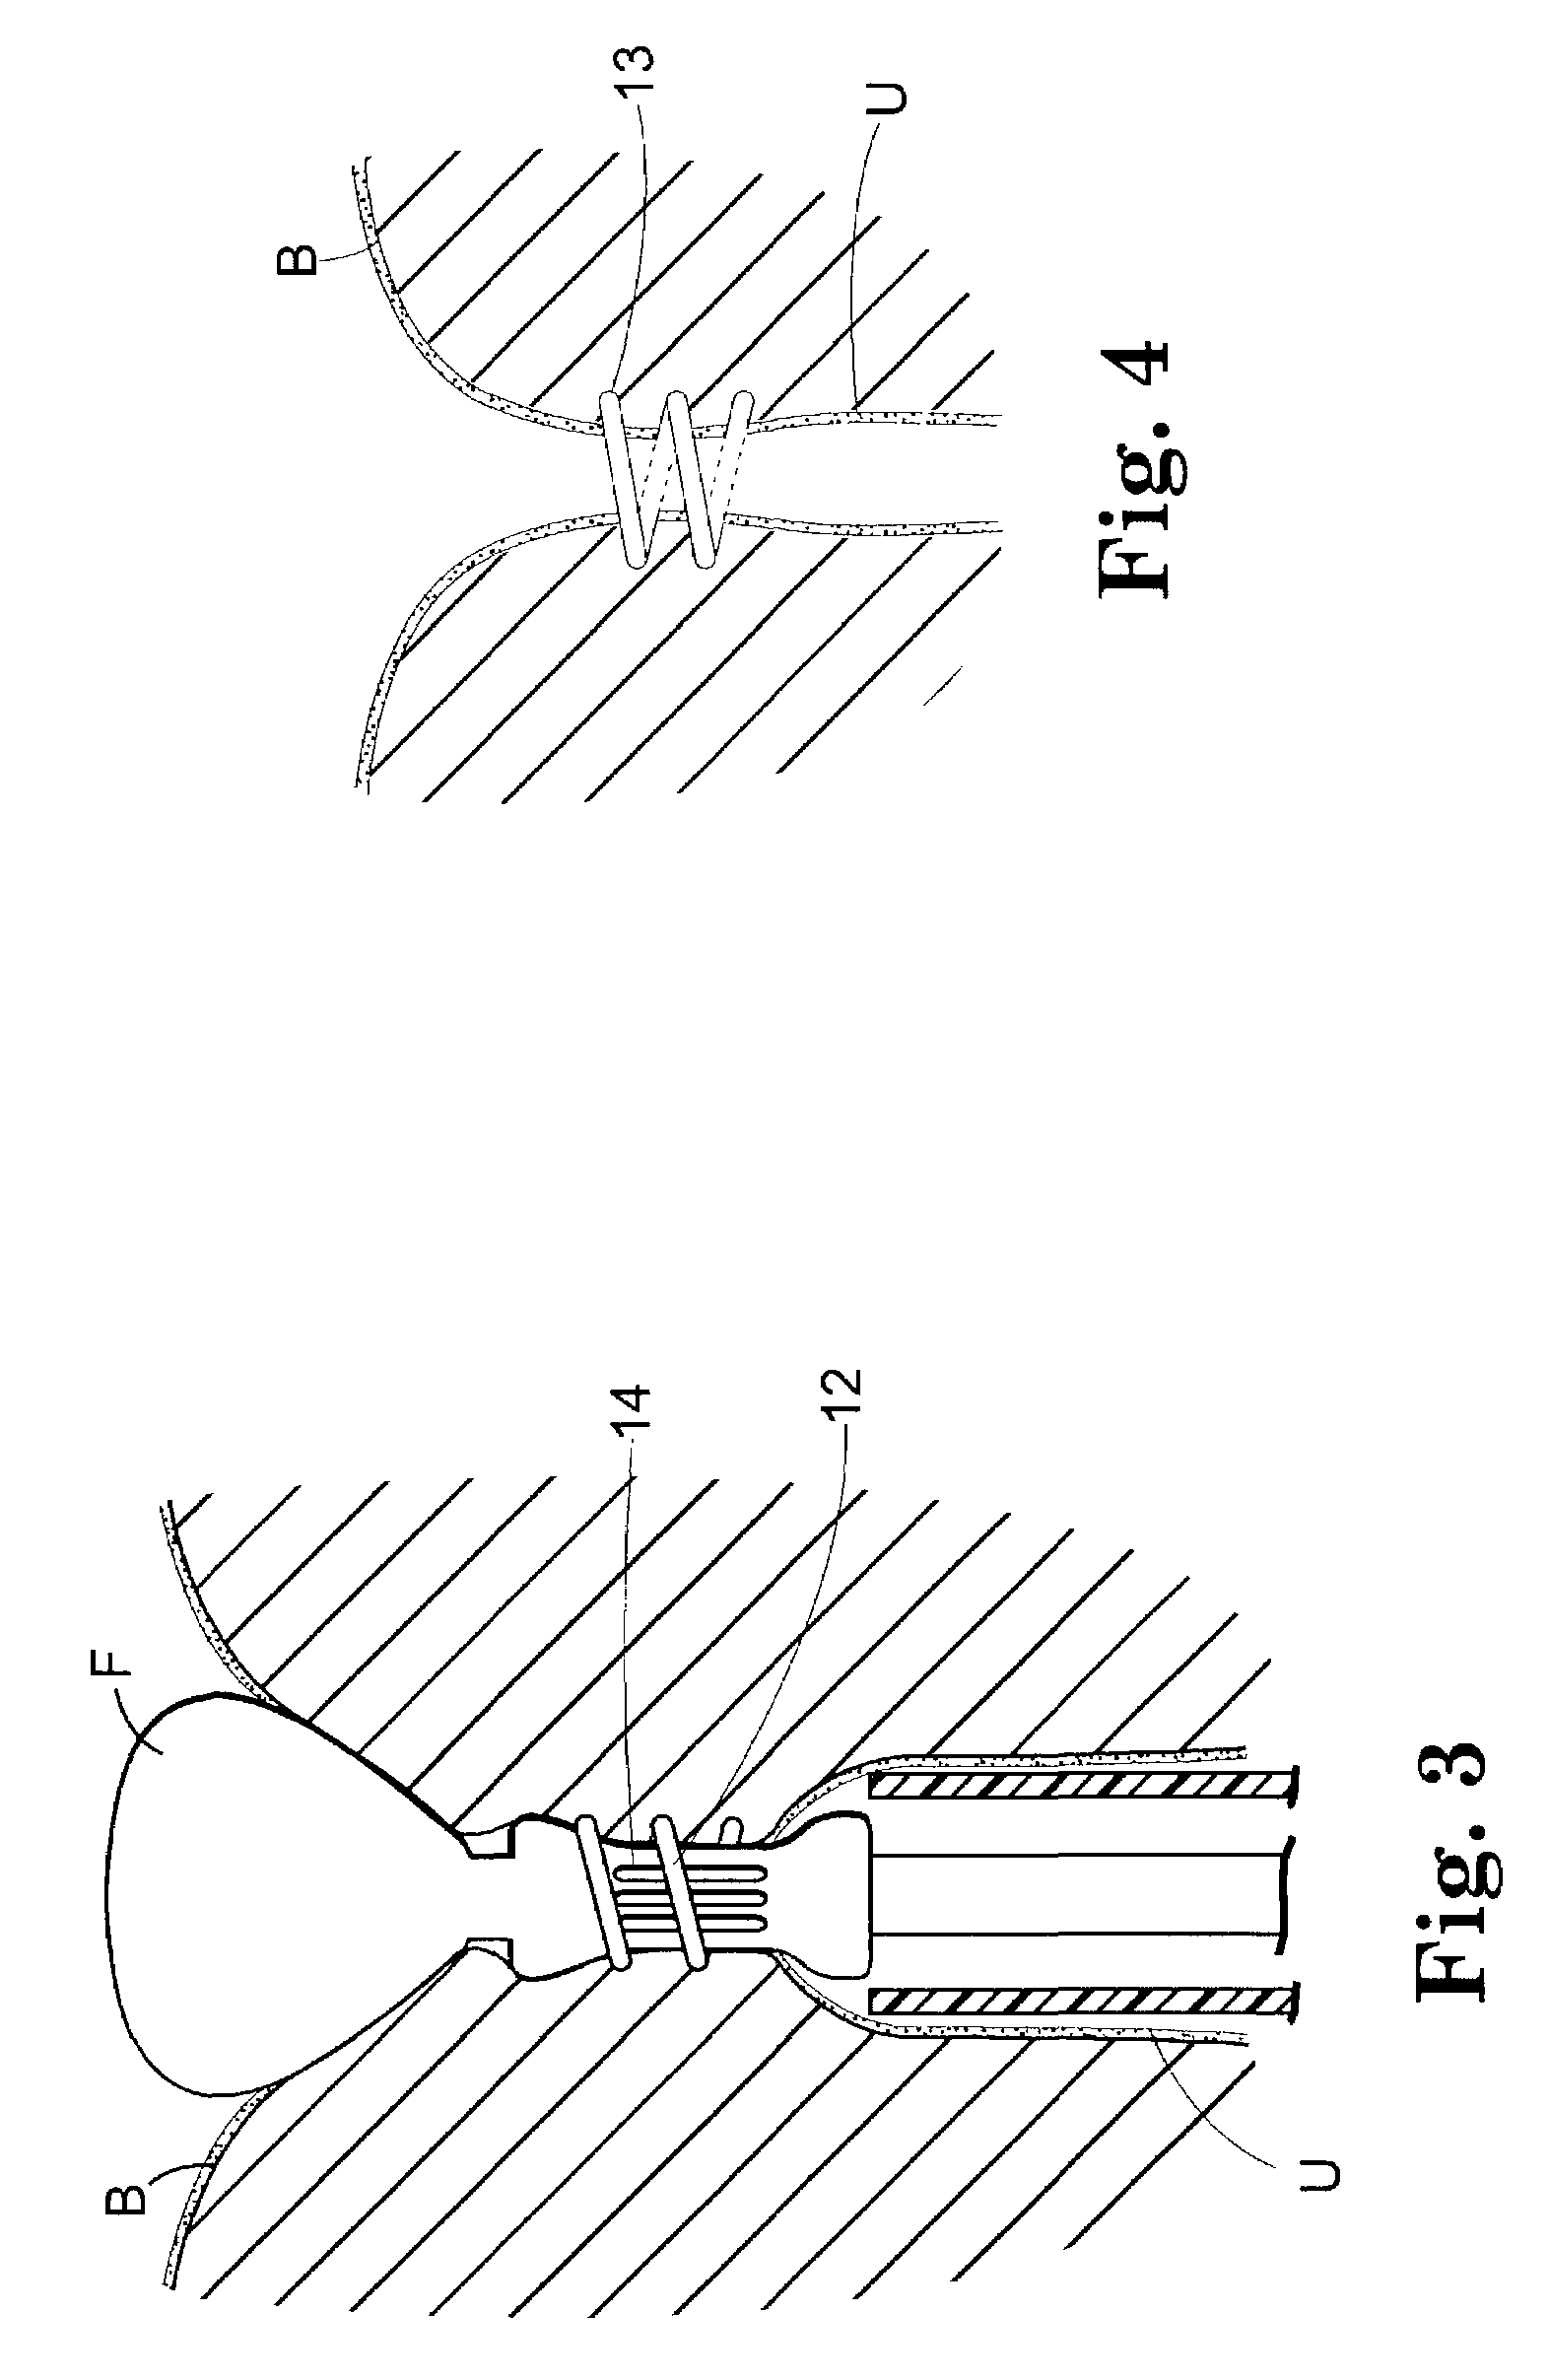 Surgical articles for placing an implant about a tubular tissue structure and methods